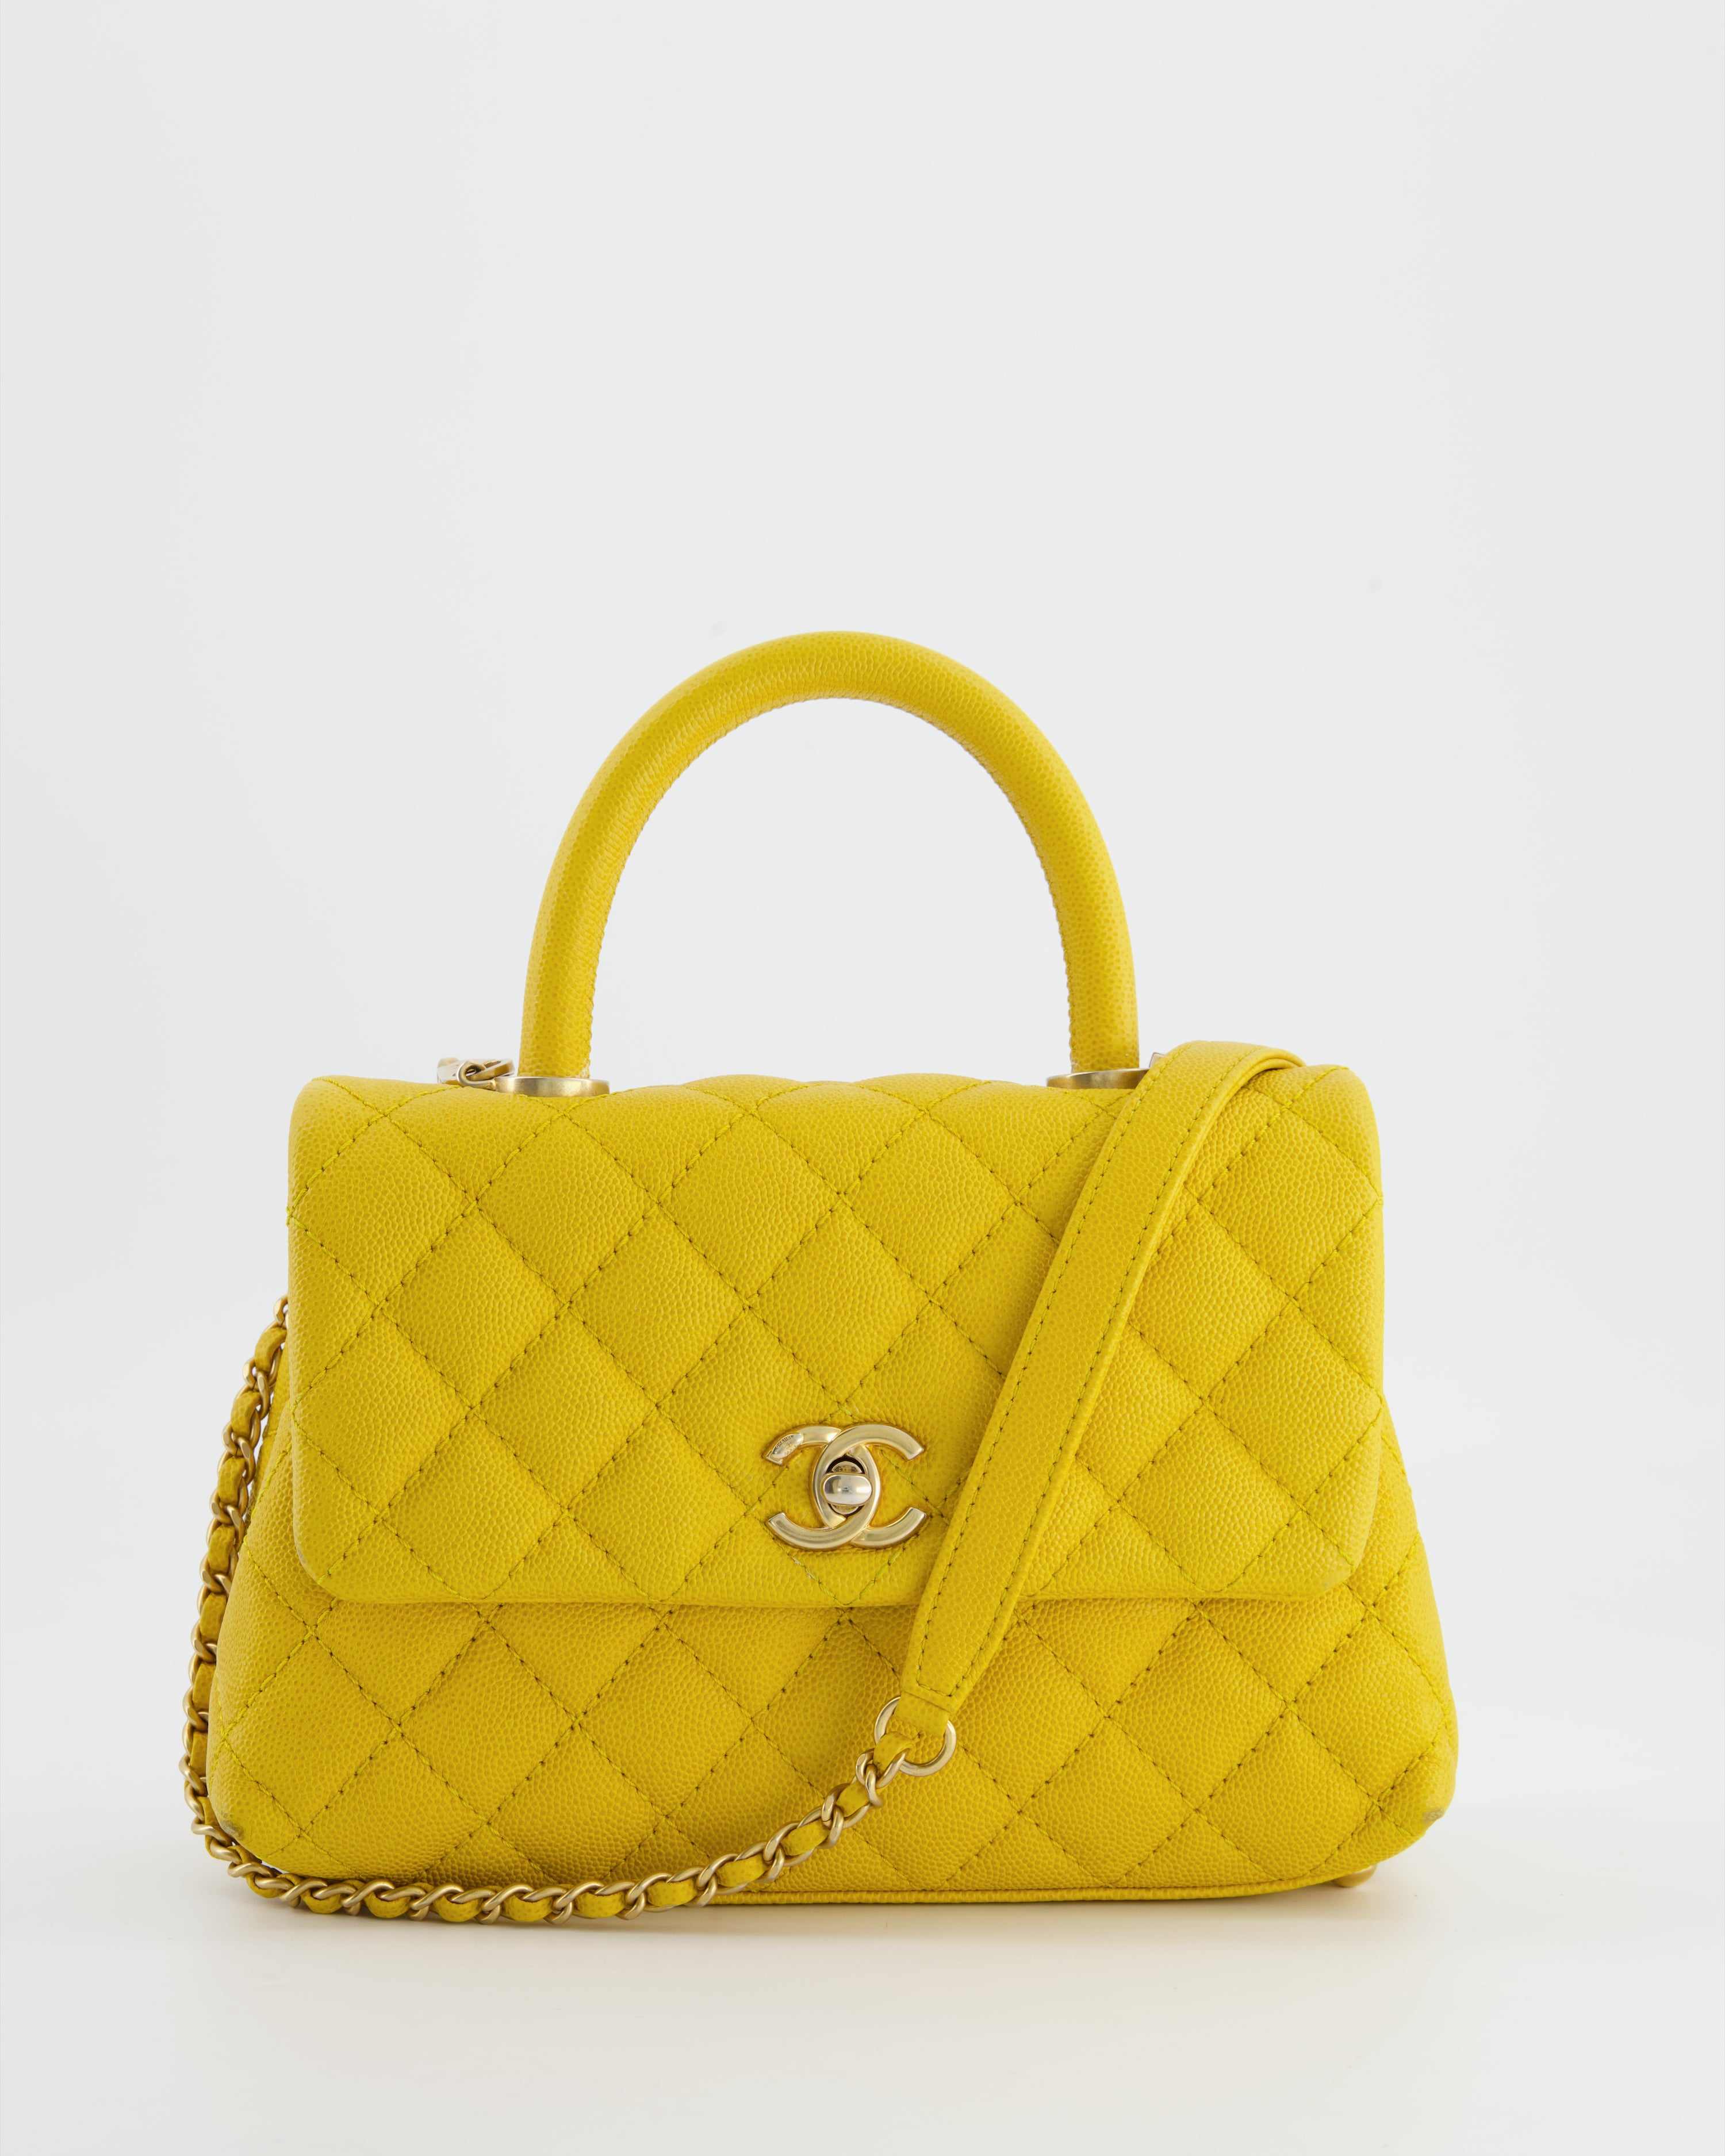 Small Boy Bag Mustard Yellow Colour in Calfskin Leather with gold tone  hardware and nylon lining Chanel 2015  2016  Handbags and Accessories  Online  Ecommerce Retail  Sothebys